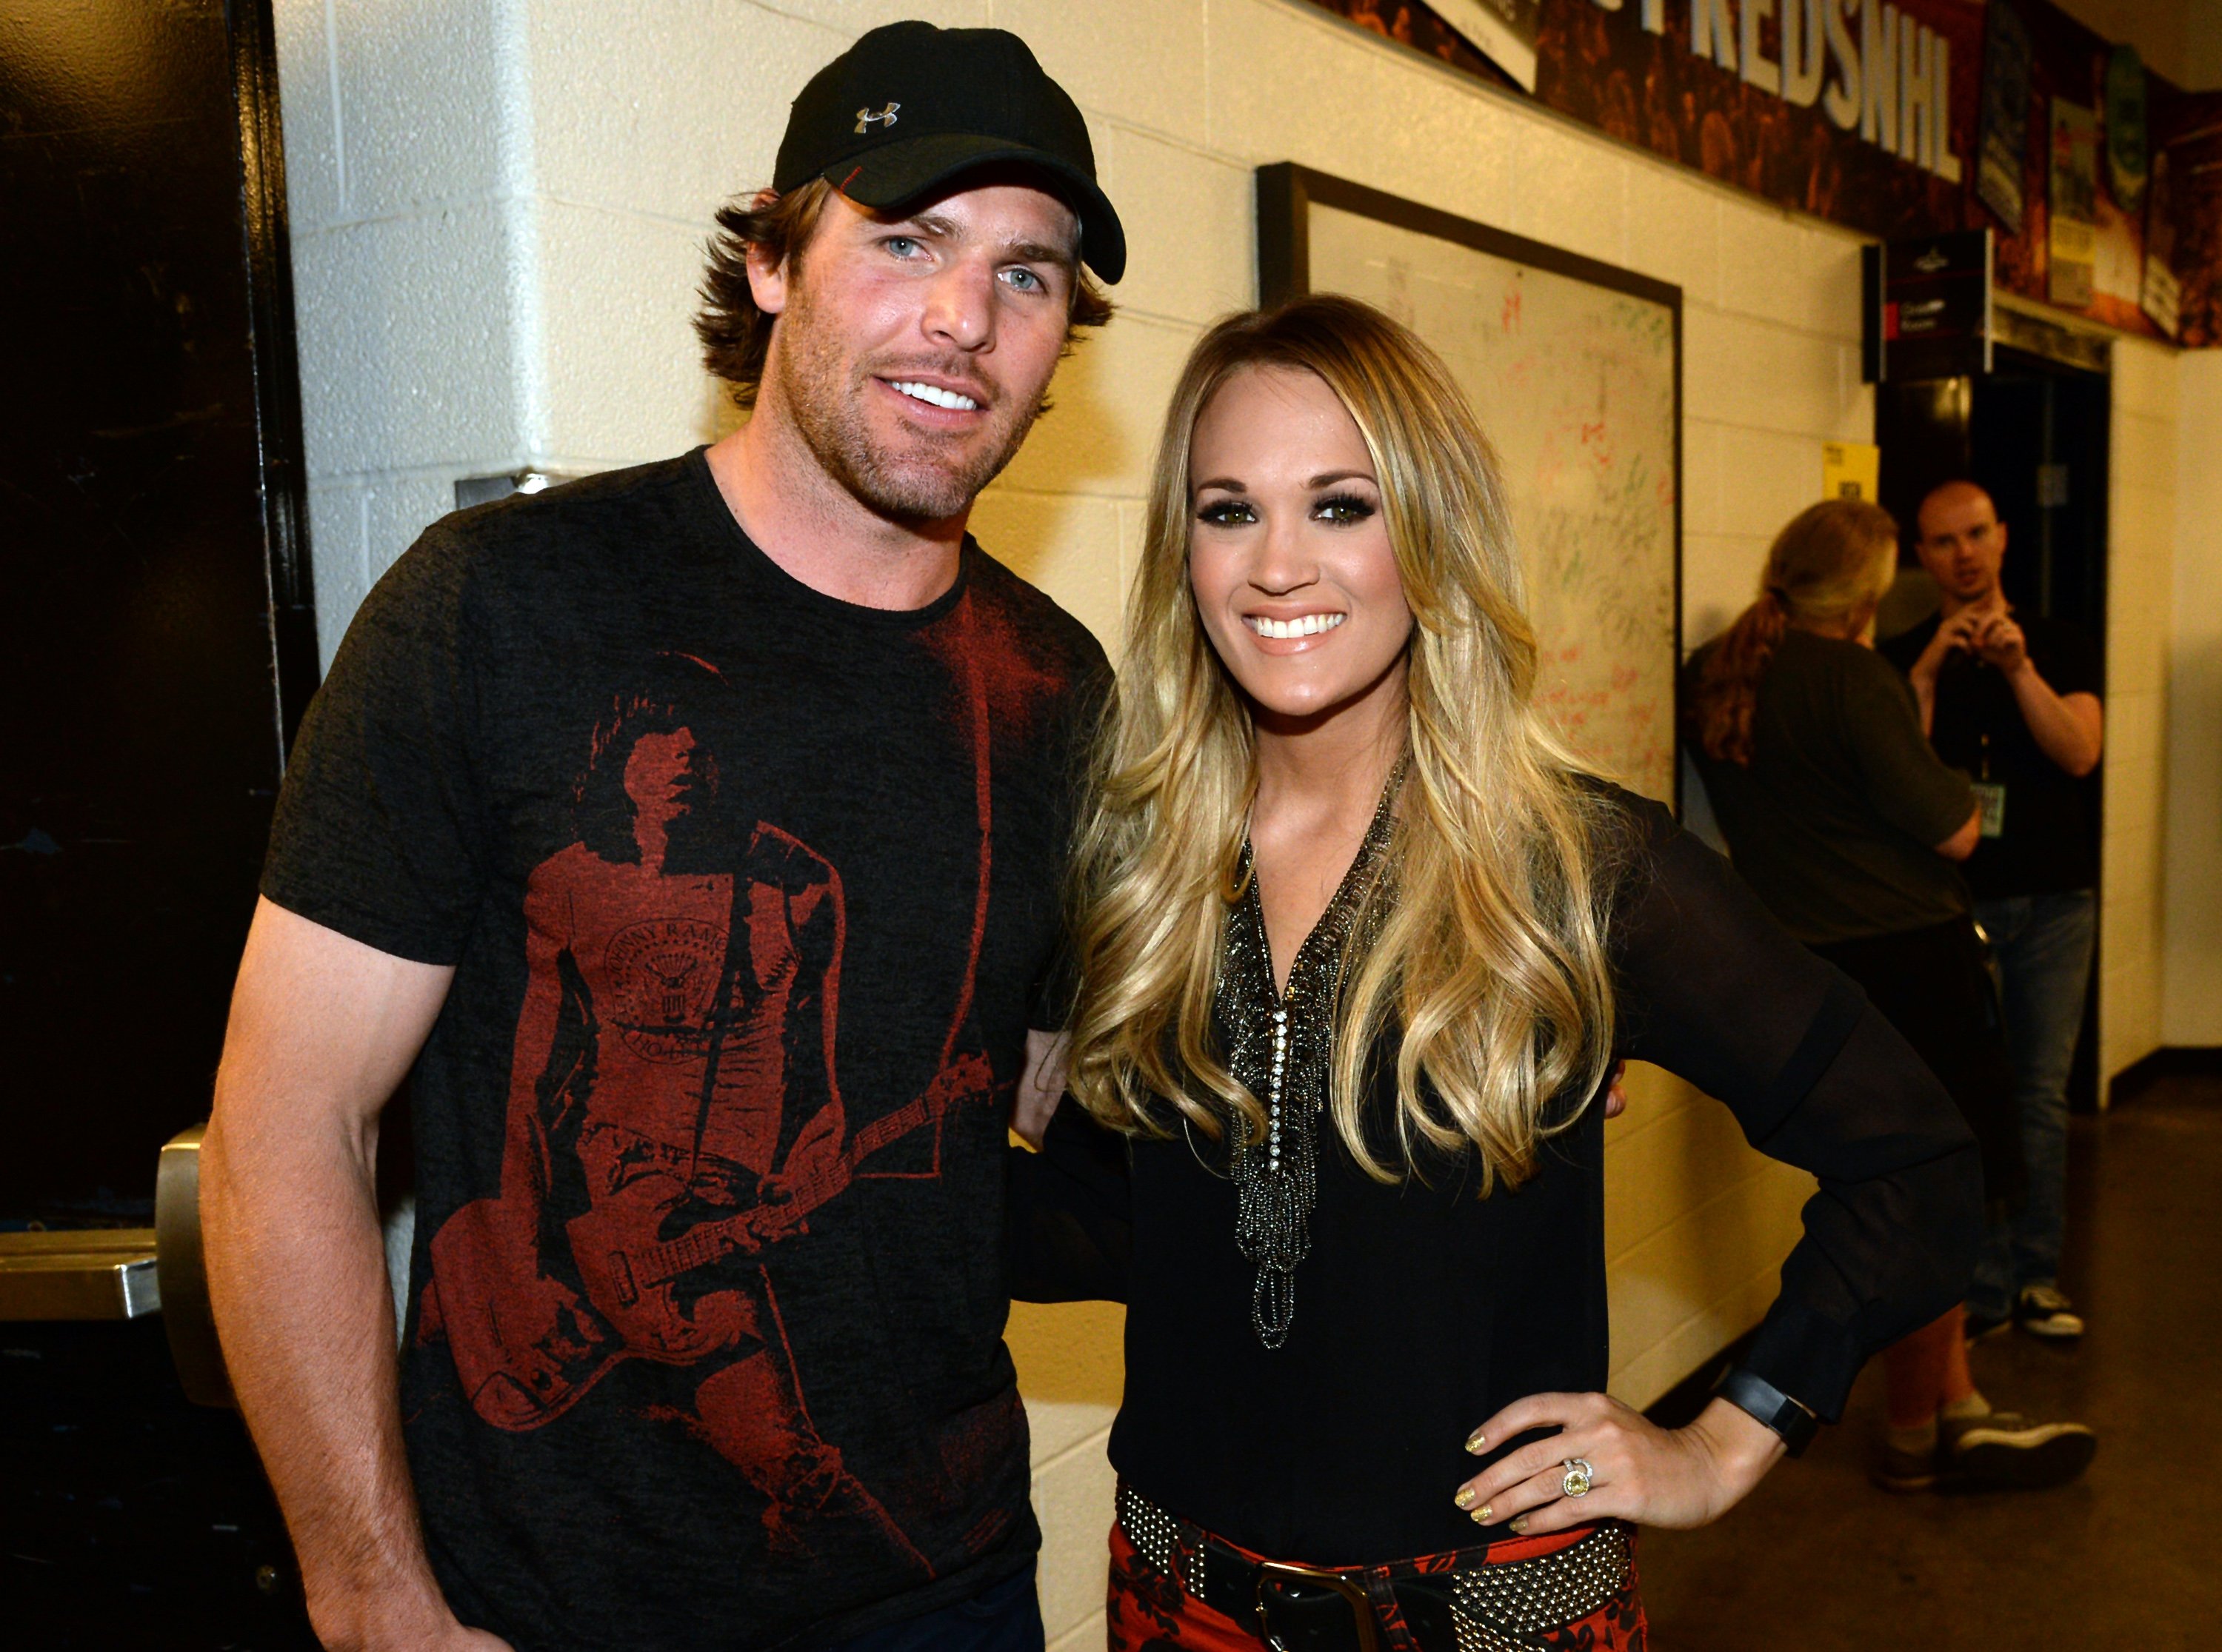 Carrie Underwood (right) and husband Mike Fisher